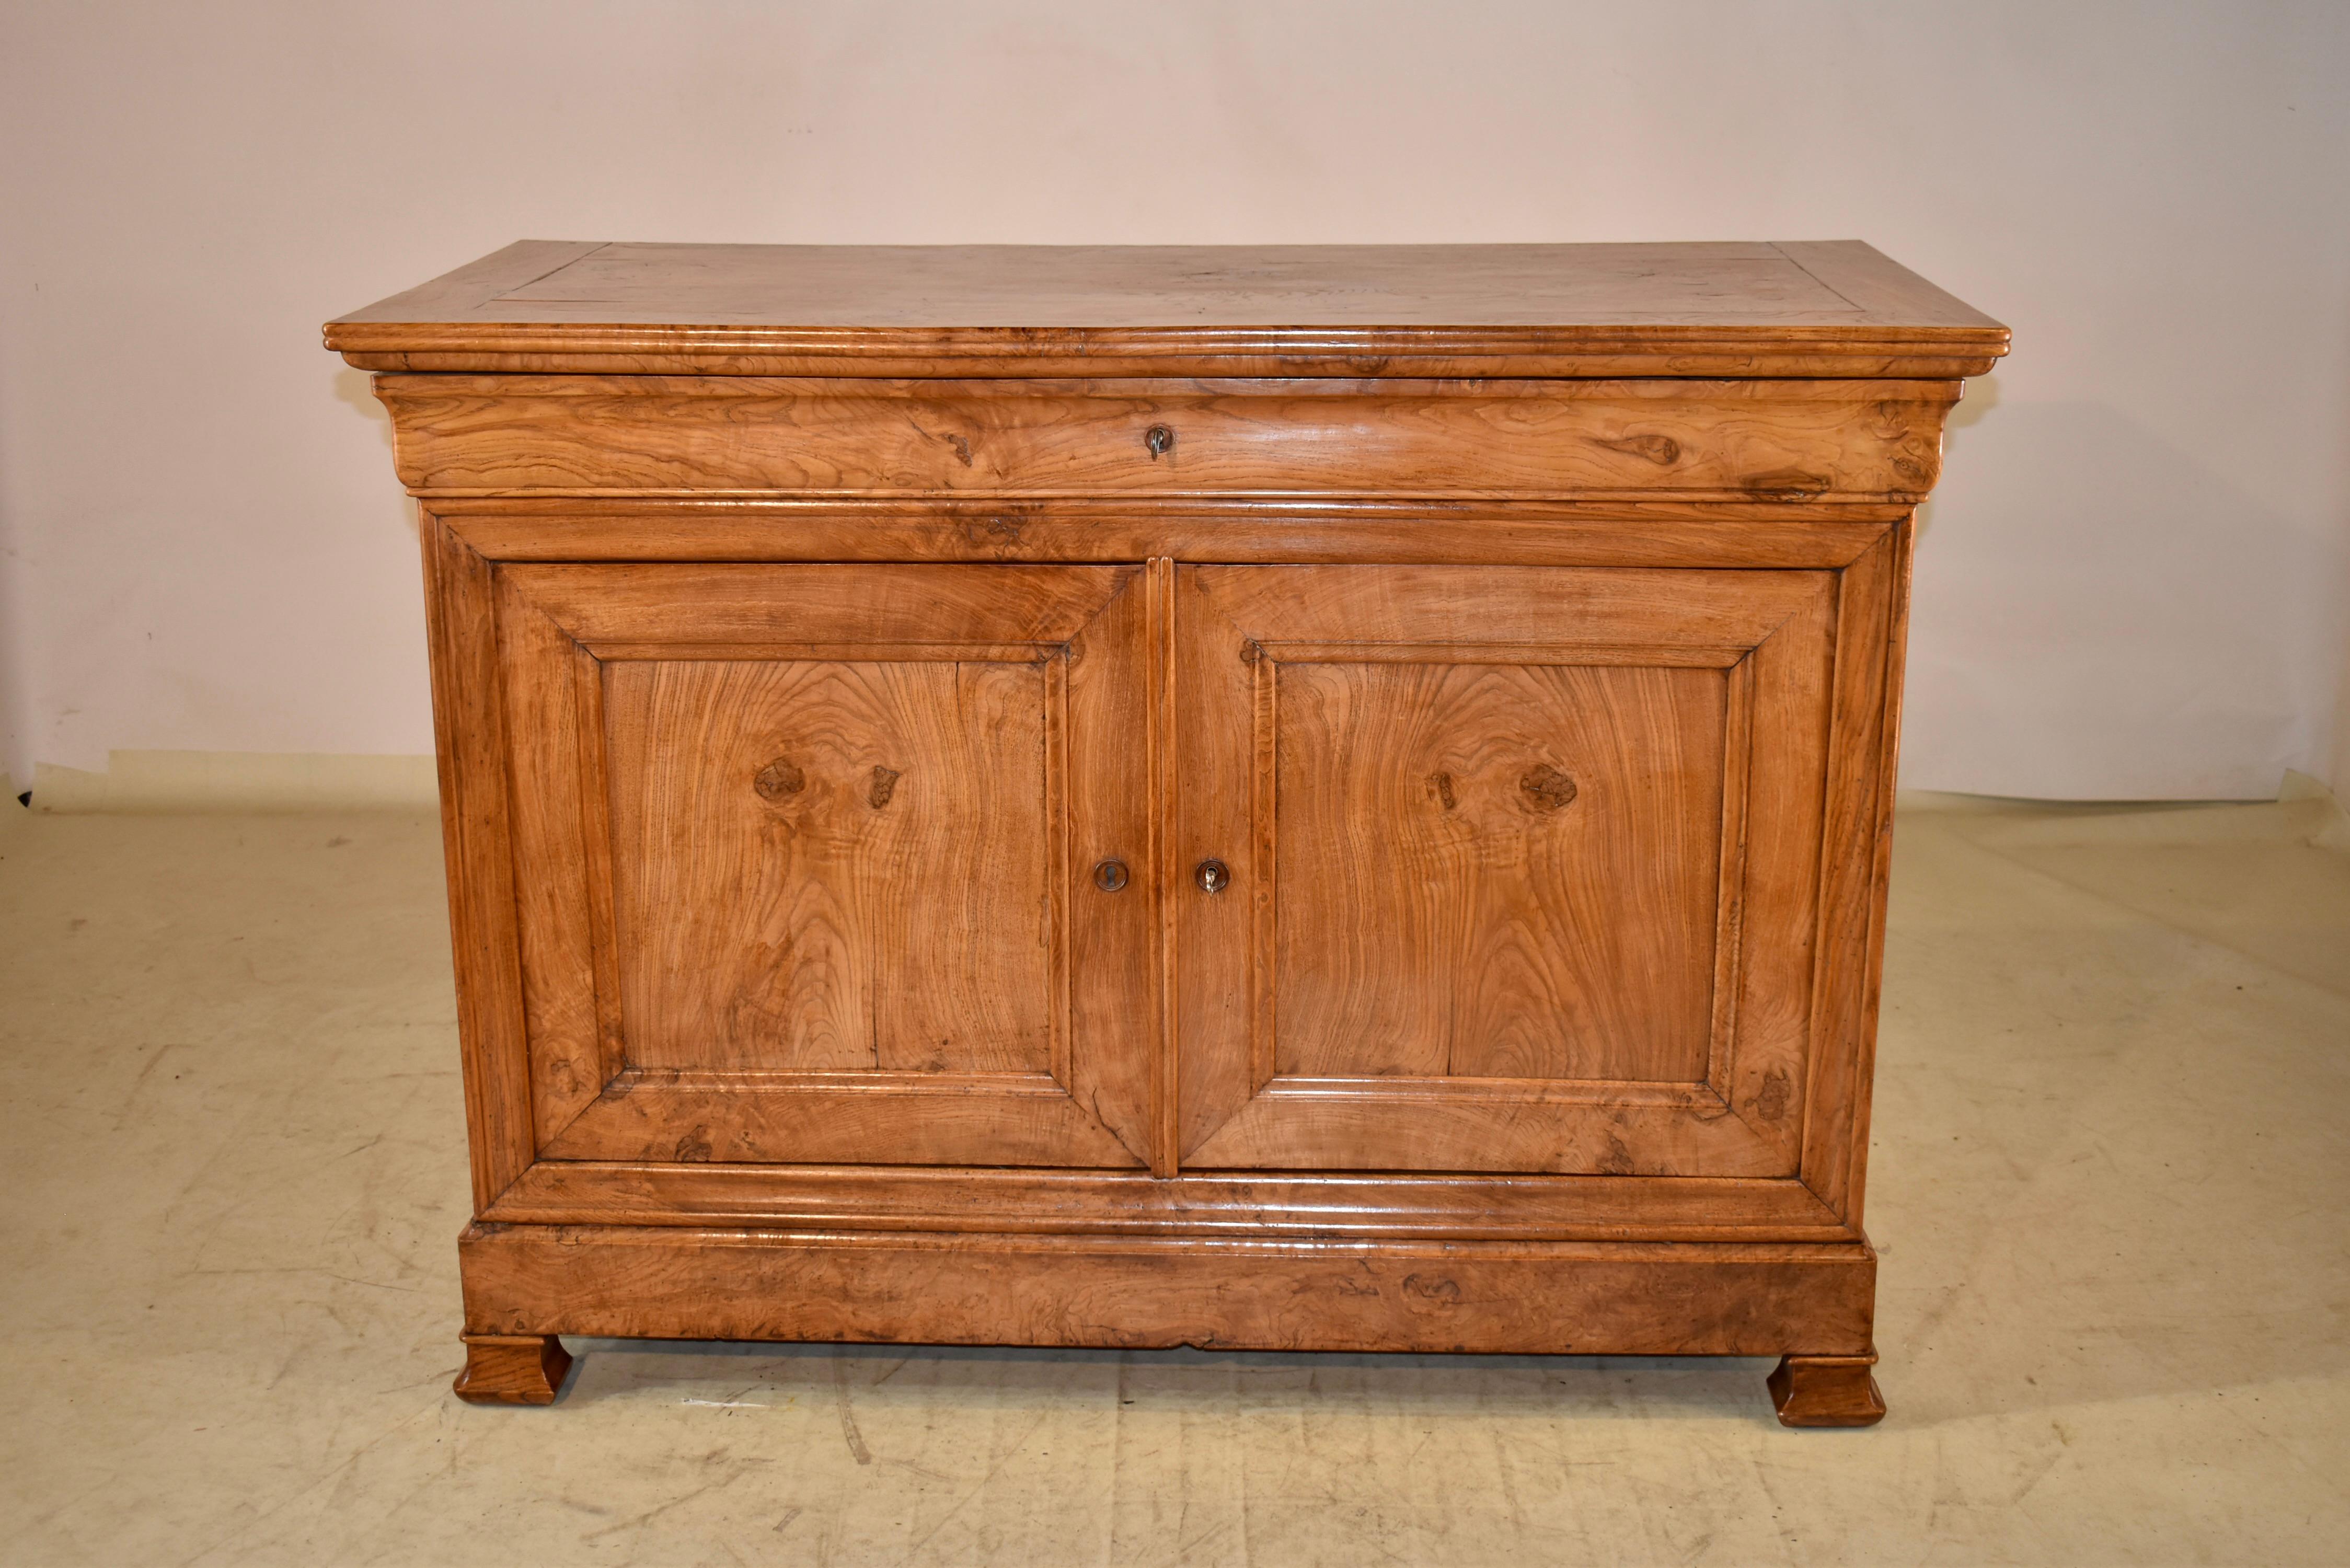 19th century elm buffet from France.  The top is made from exquisitely grained burl elm, and is banded in the same, for a stunning top perspective.  The sides are paneled and feature burl elm panels as well for an interesting design feature on the